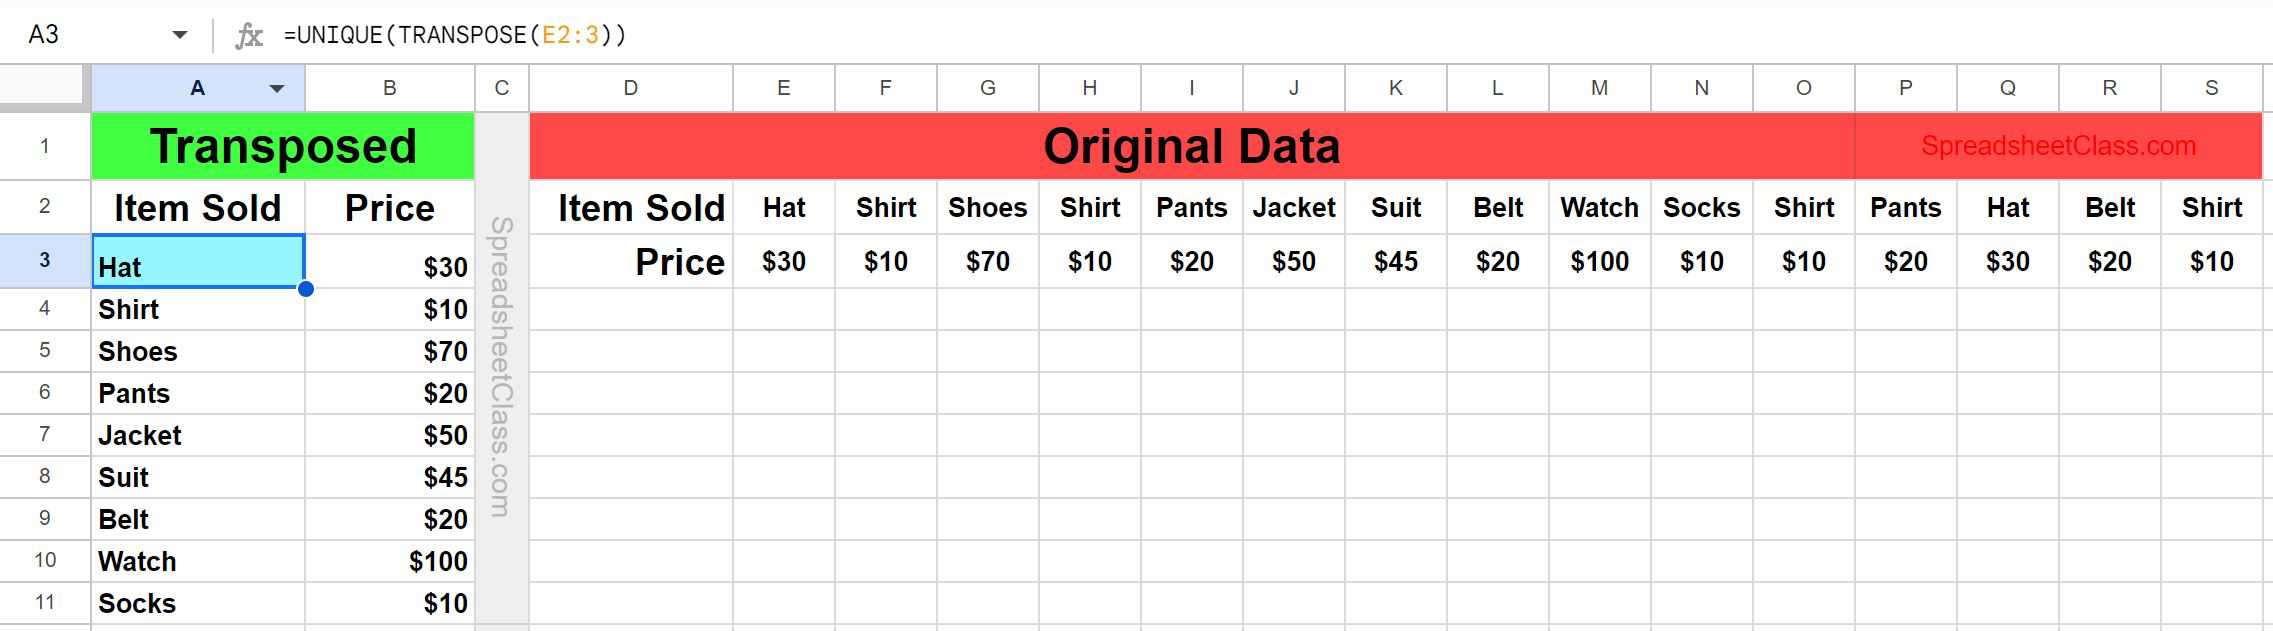 Example of Using the UNIQUE TRANSPOSE nested function to transpose and remove duplicates from inventory data with multiple columns in Google Sheets